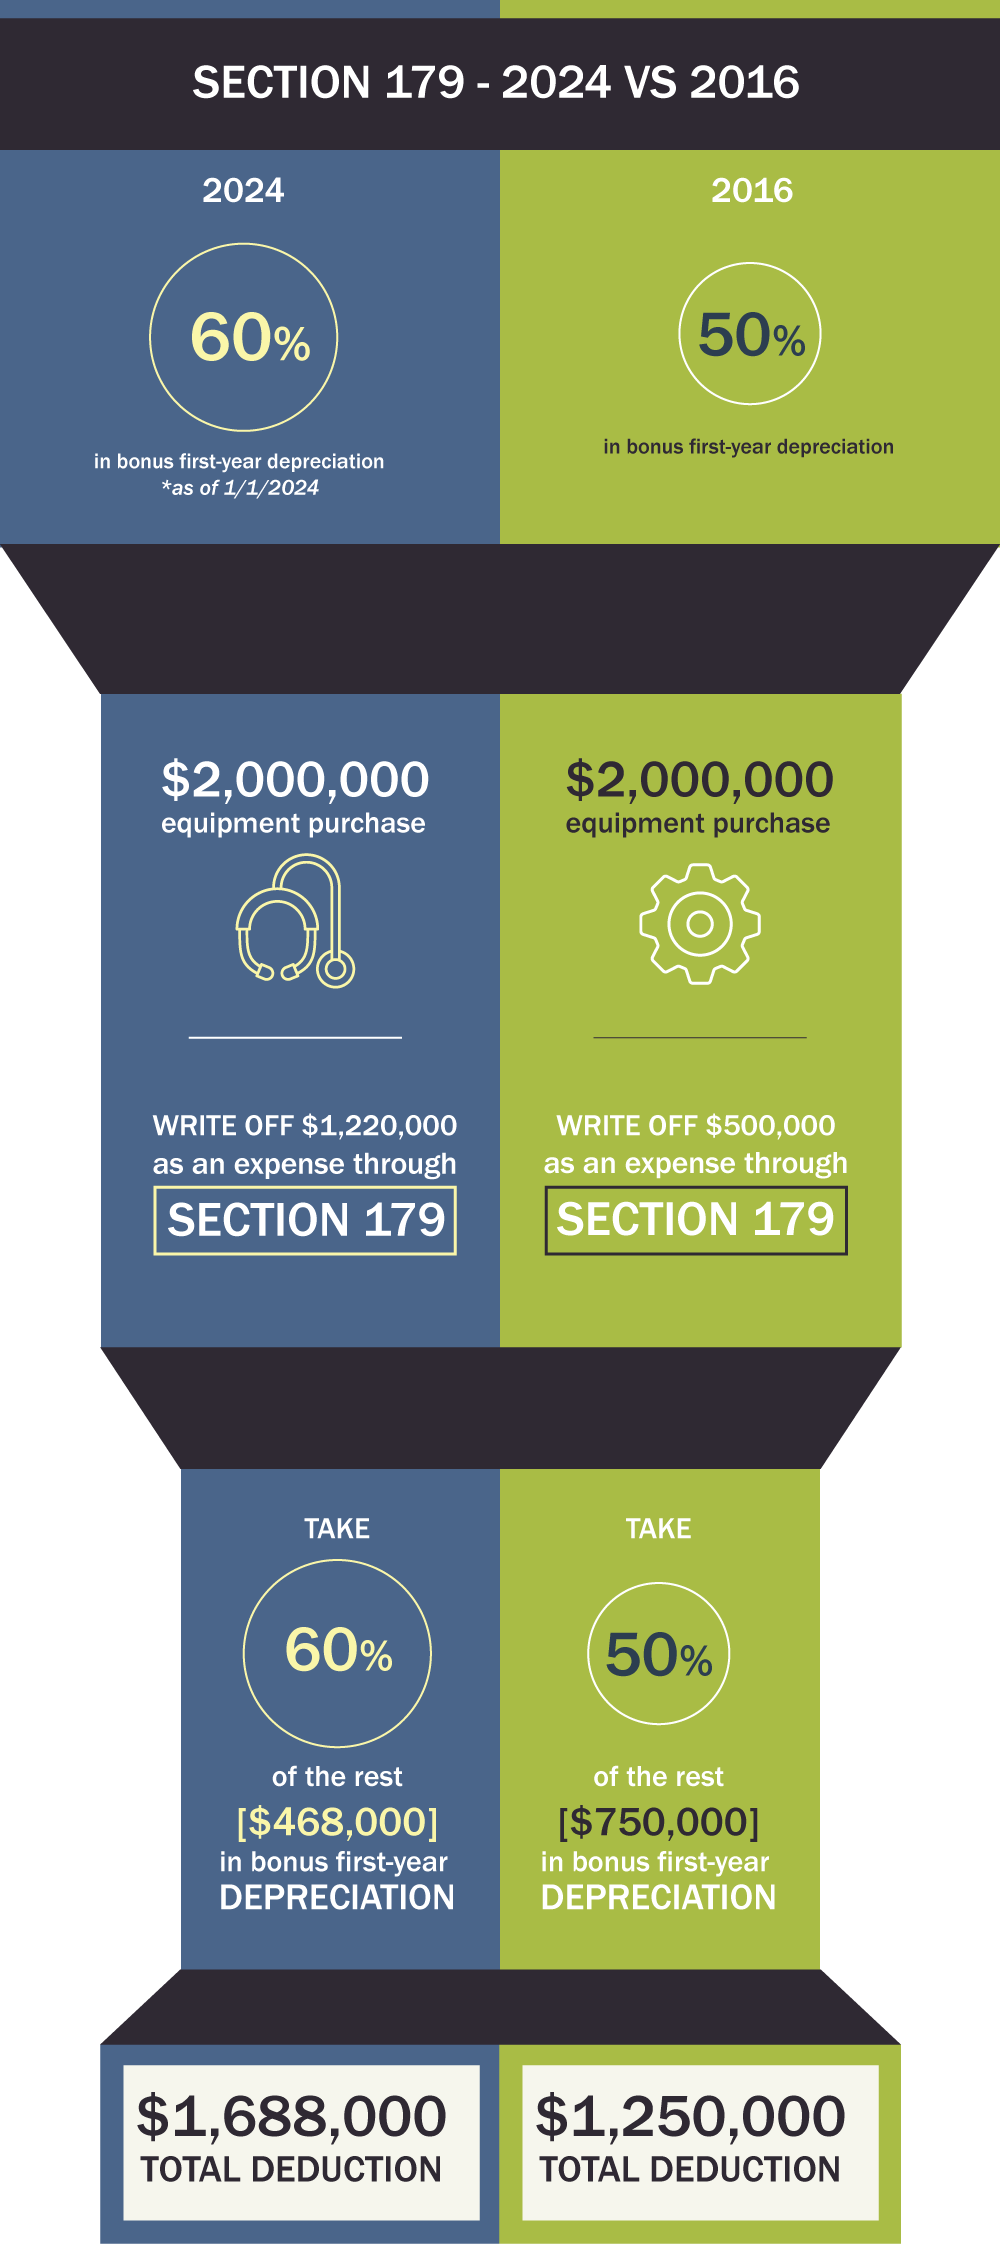 This is an infographic that compares the tax benefits of Section 179 for equipment purchases in the years 2024 and 2016. It shows that in 2024, businesses can write off more expenses and take a higher percentage of bonus first-year depreciation than in 2016. The infographic uses dark blue and green colors to represent 2024 and 2016 respectively, and has icons of headphones and gears to illustrate equipment. It also shows the total deduction amount for each year at the bottom. The infographic is titled “Section 179 - 2024 vs 2016”.